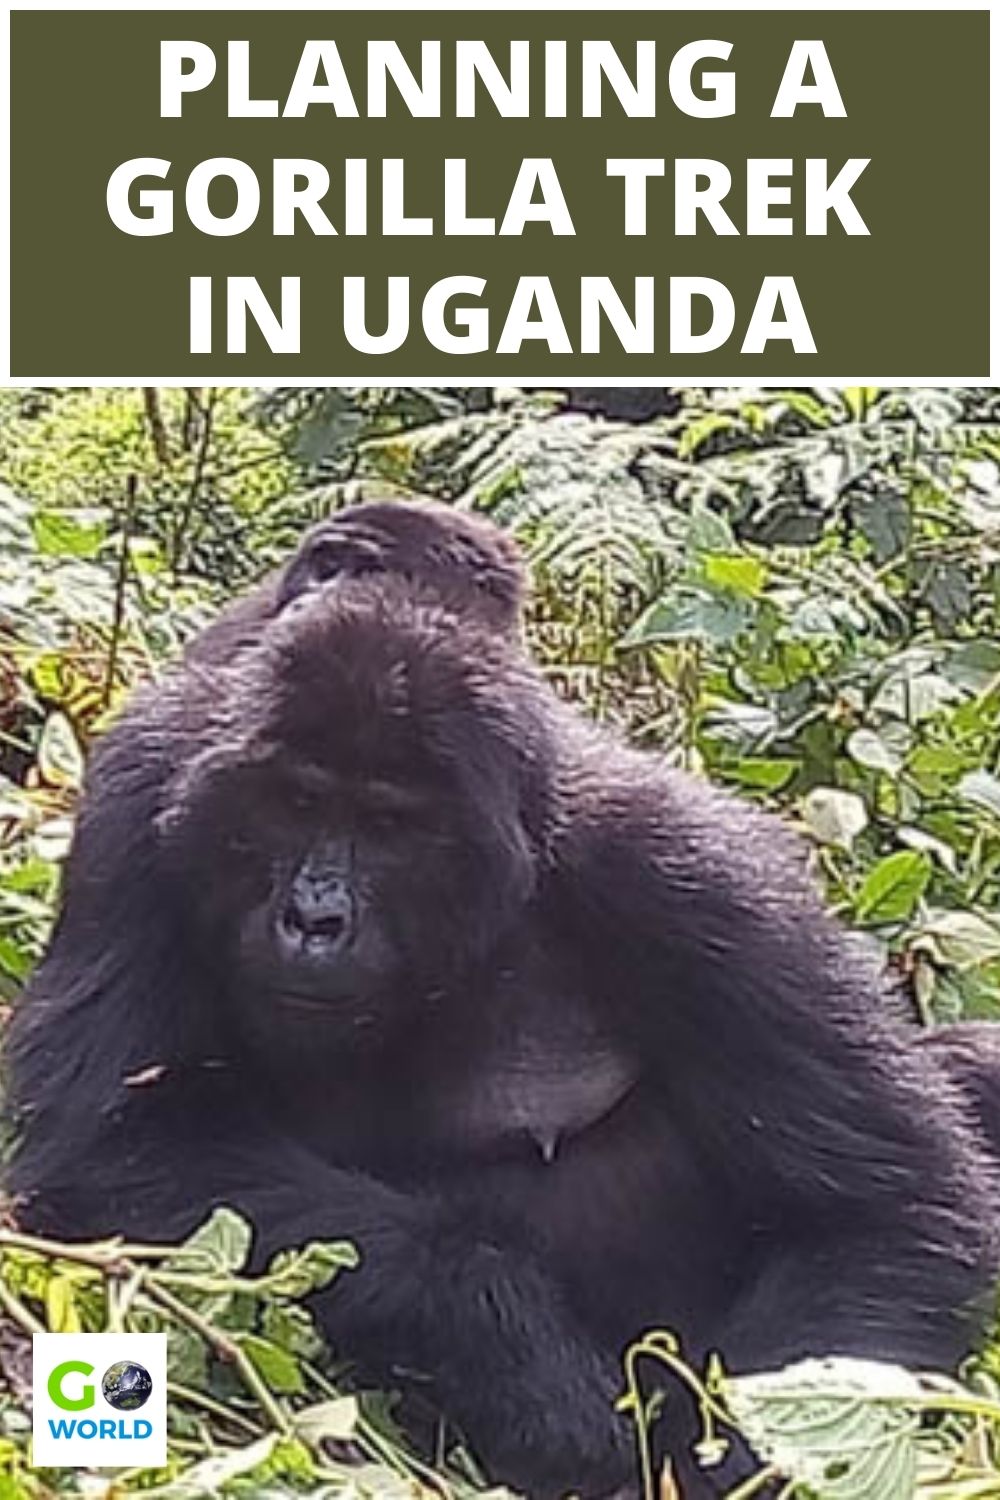 Everything you need to know about planning the experience of gorilla trekking in Uganda. When to go, how to book and how long to allow. #gorillatrekking #ugandagorillatrek